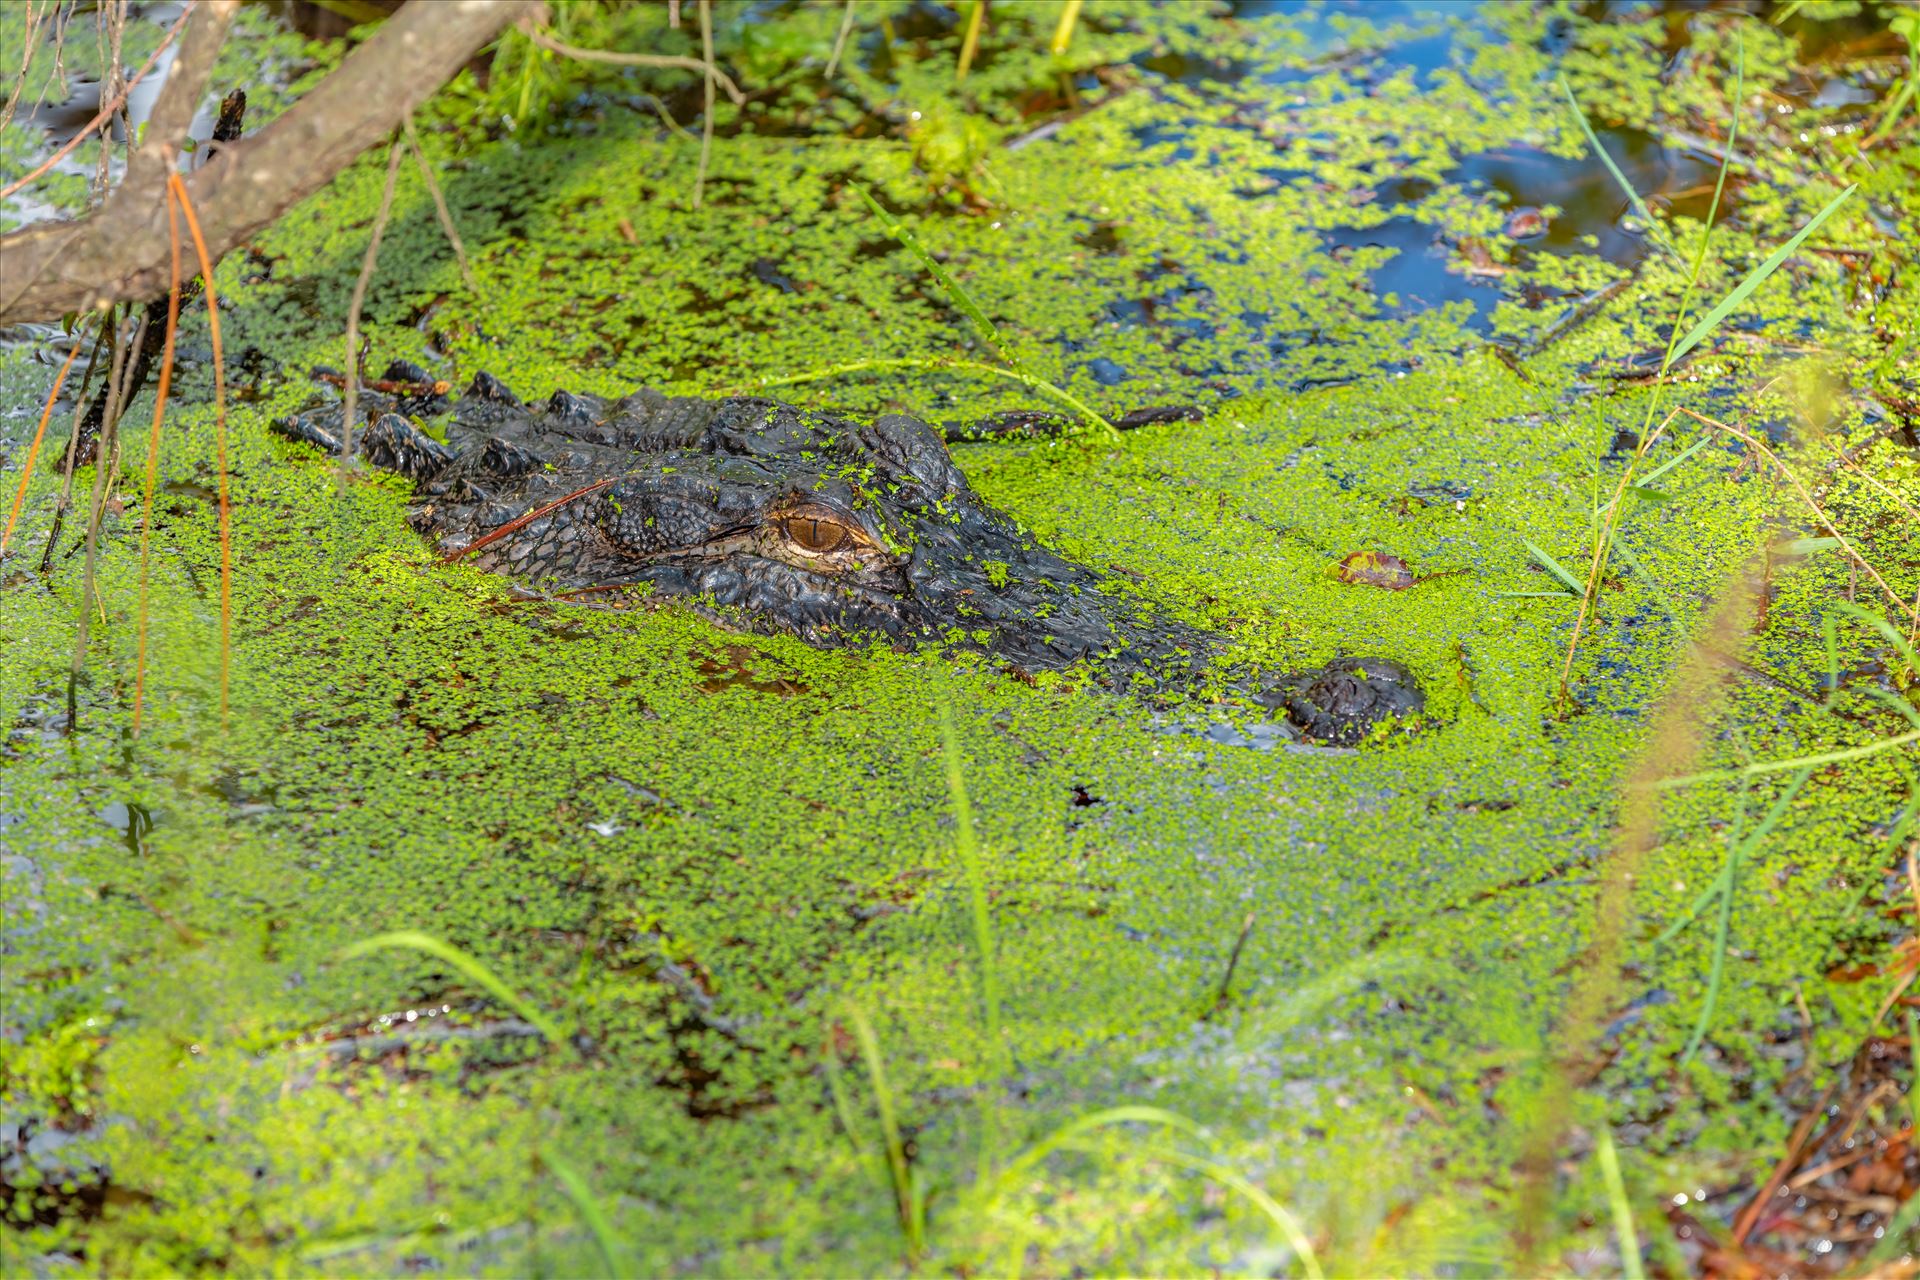 3-4 foot alligator at the very edge of path, gator lake at st andrews state park ss as-8502097.jpg - Scary that I didn't see this guy until I was right in front of him! On the path beside gator lake in St. Andrews state park, Florida by Terry Kelly Photography